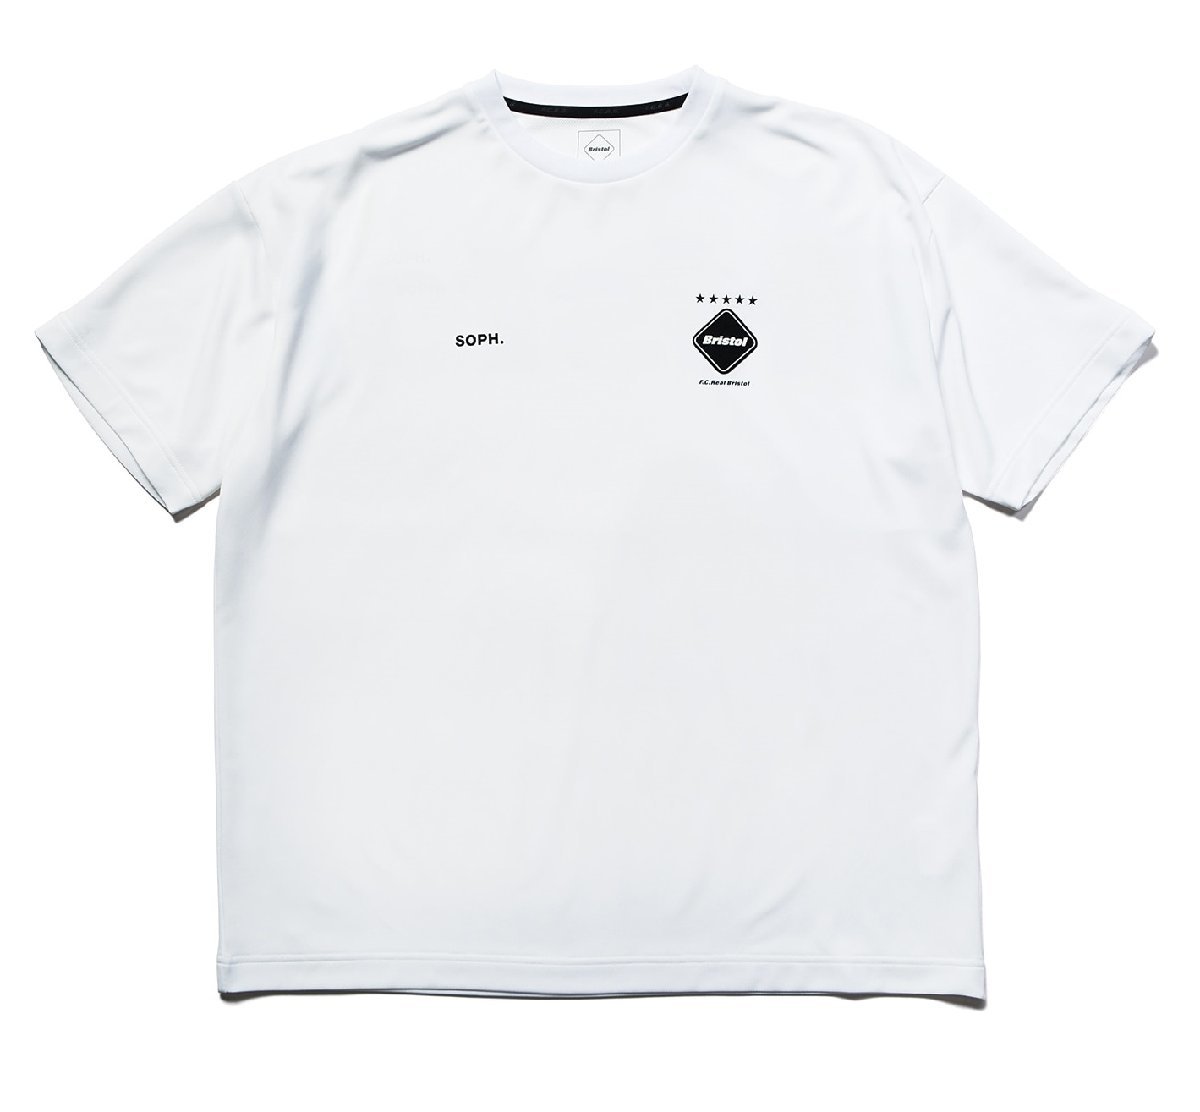 ◇F.C.Real Bristol FCRB 23ss 新品タグ付 人気 BIG LOGO WIDE TEE